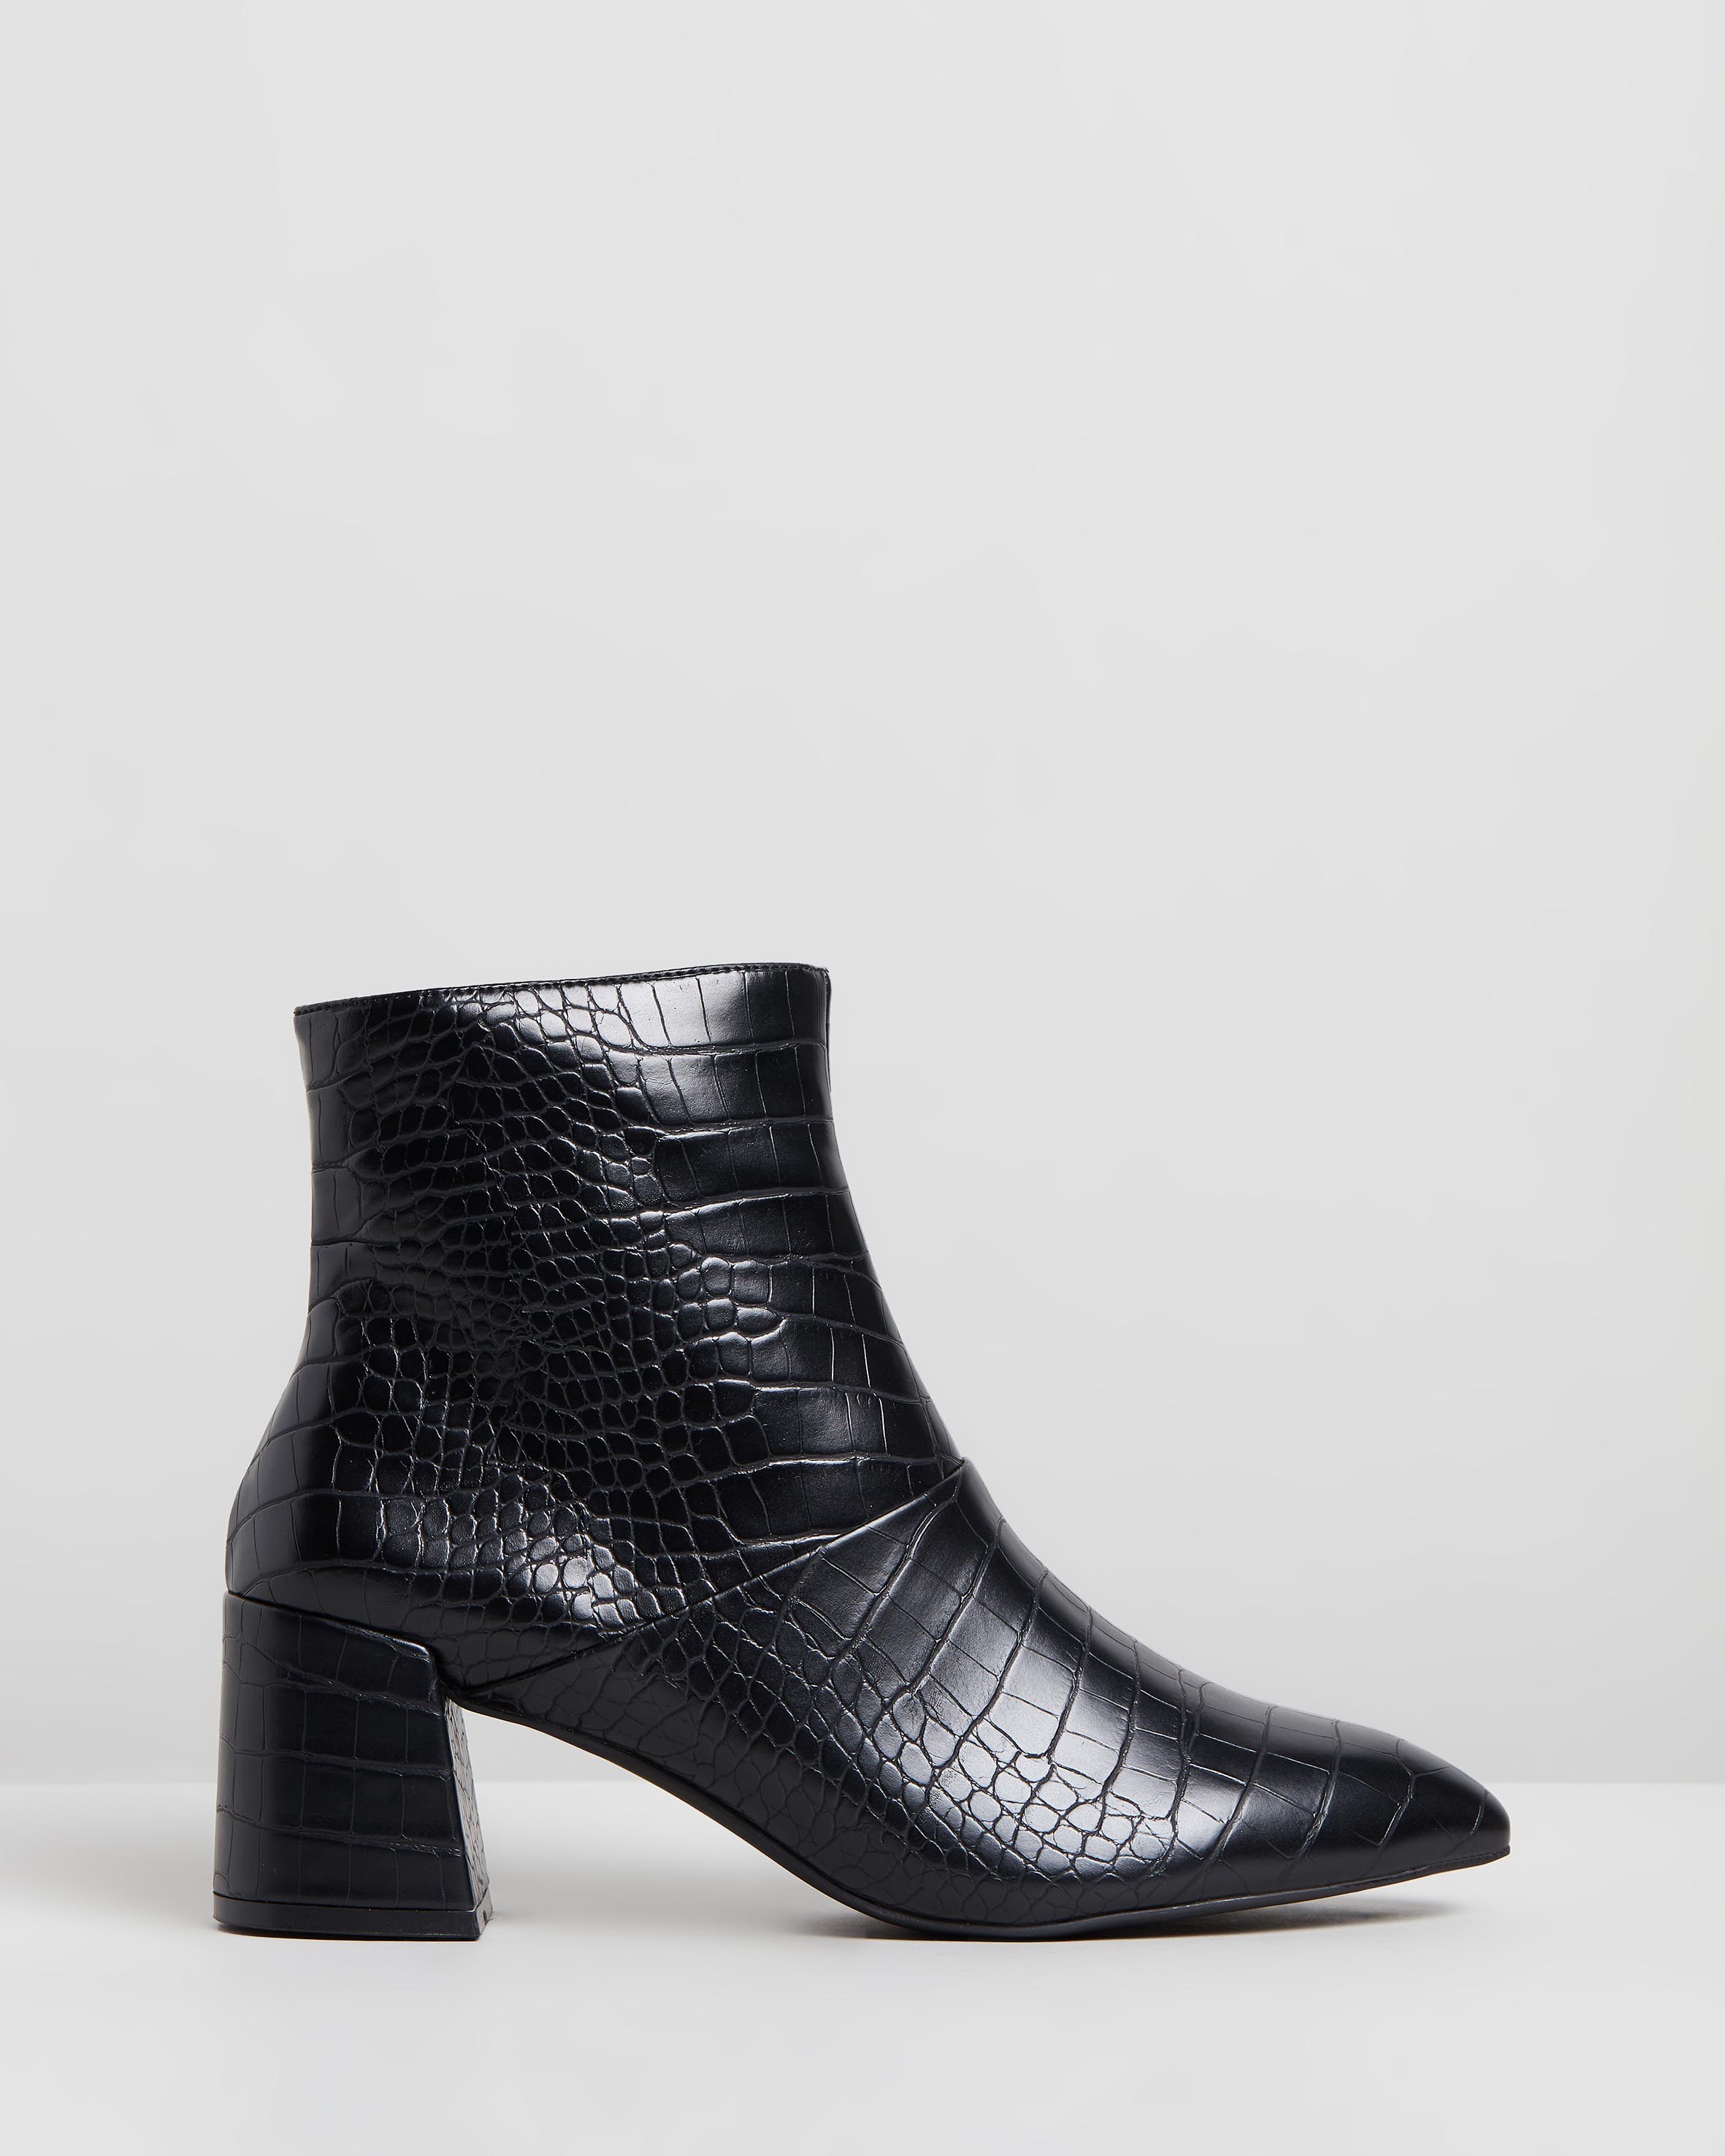 Sidney Black Croc by Therapy | ShoeSales